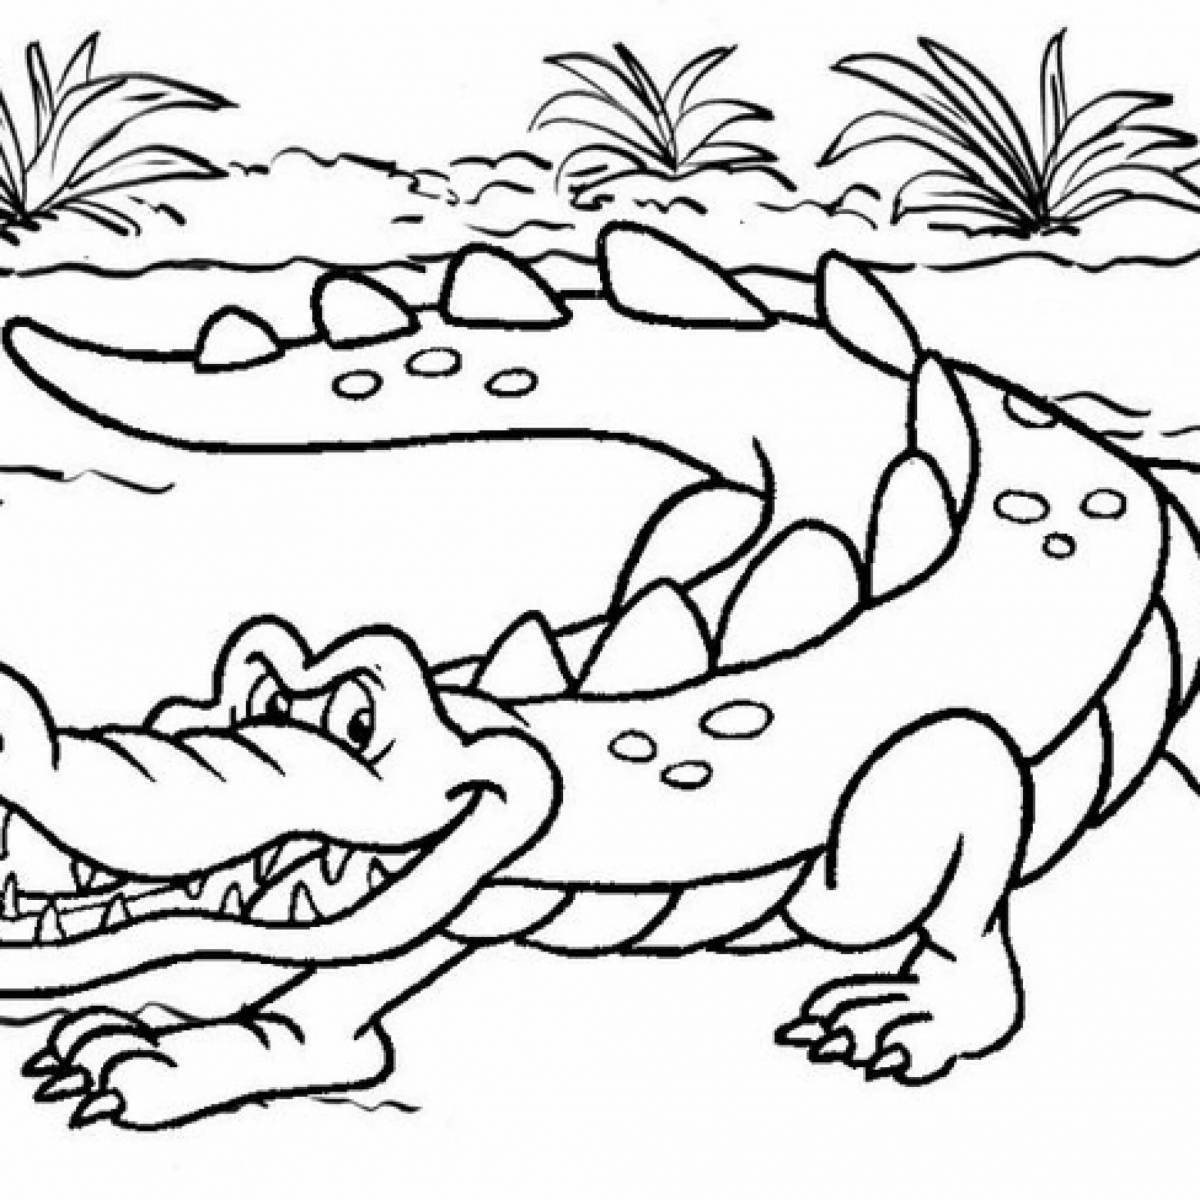 Adorable crocodile coloring book for 3-4 year olds